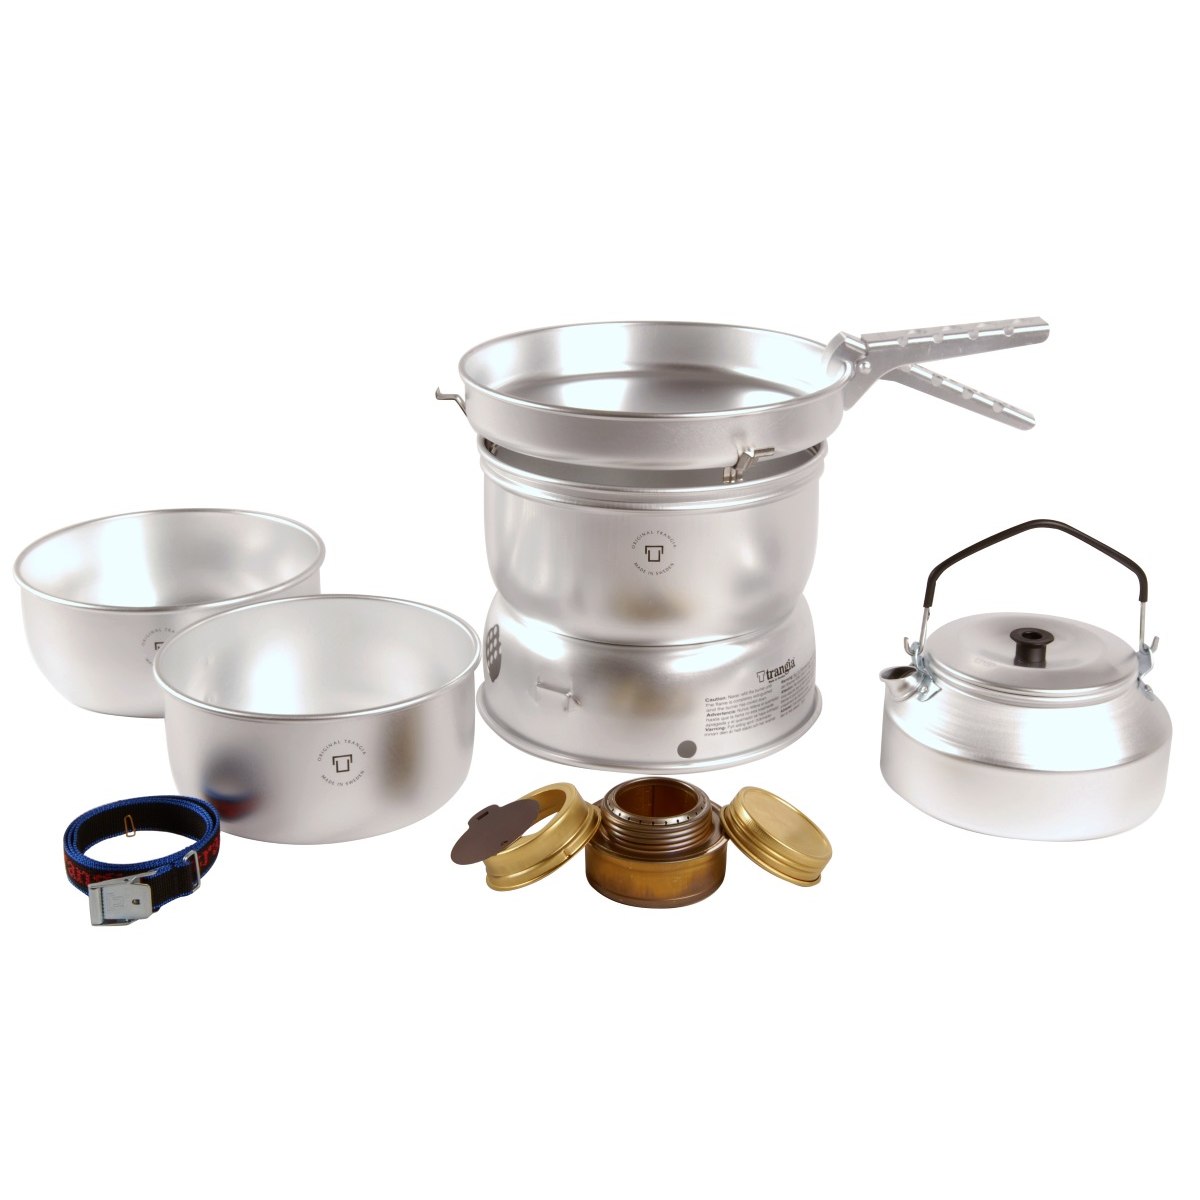 Productfoto van Trangia Storm Cooker 25-2 UL - Stove System with Kettle